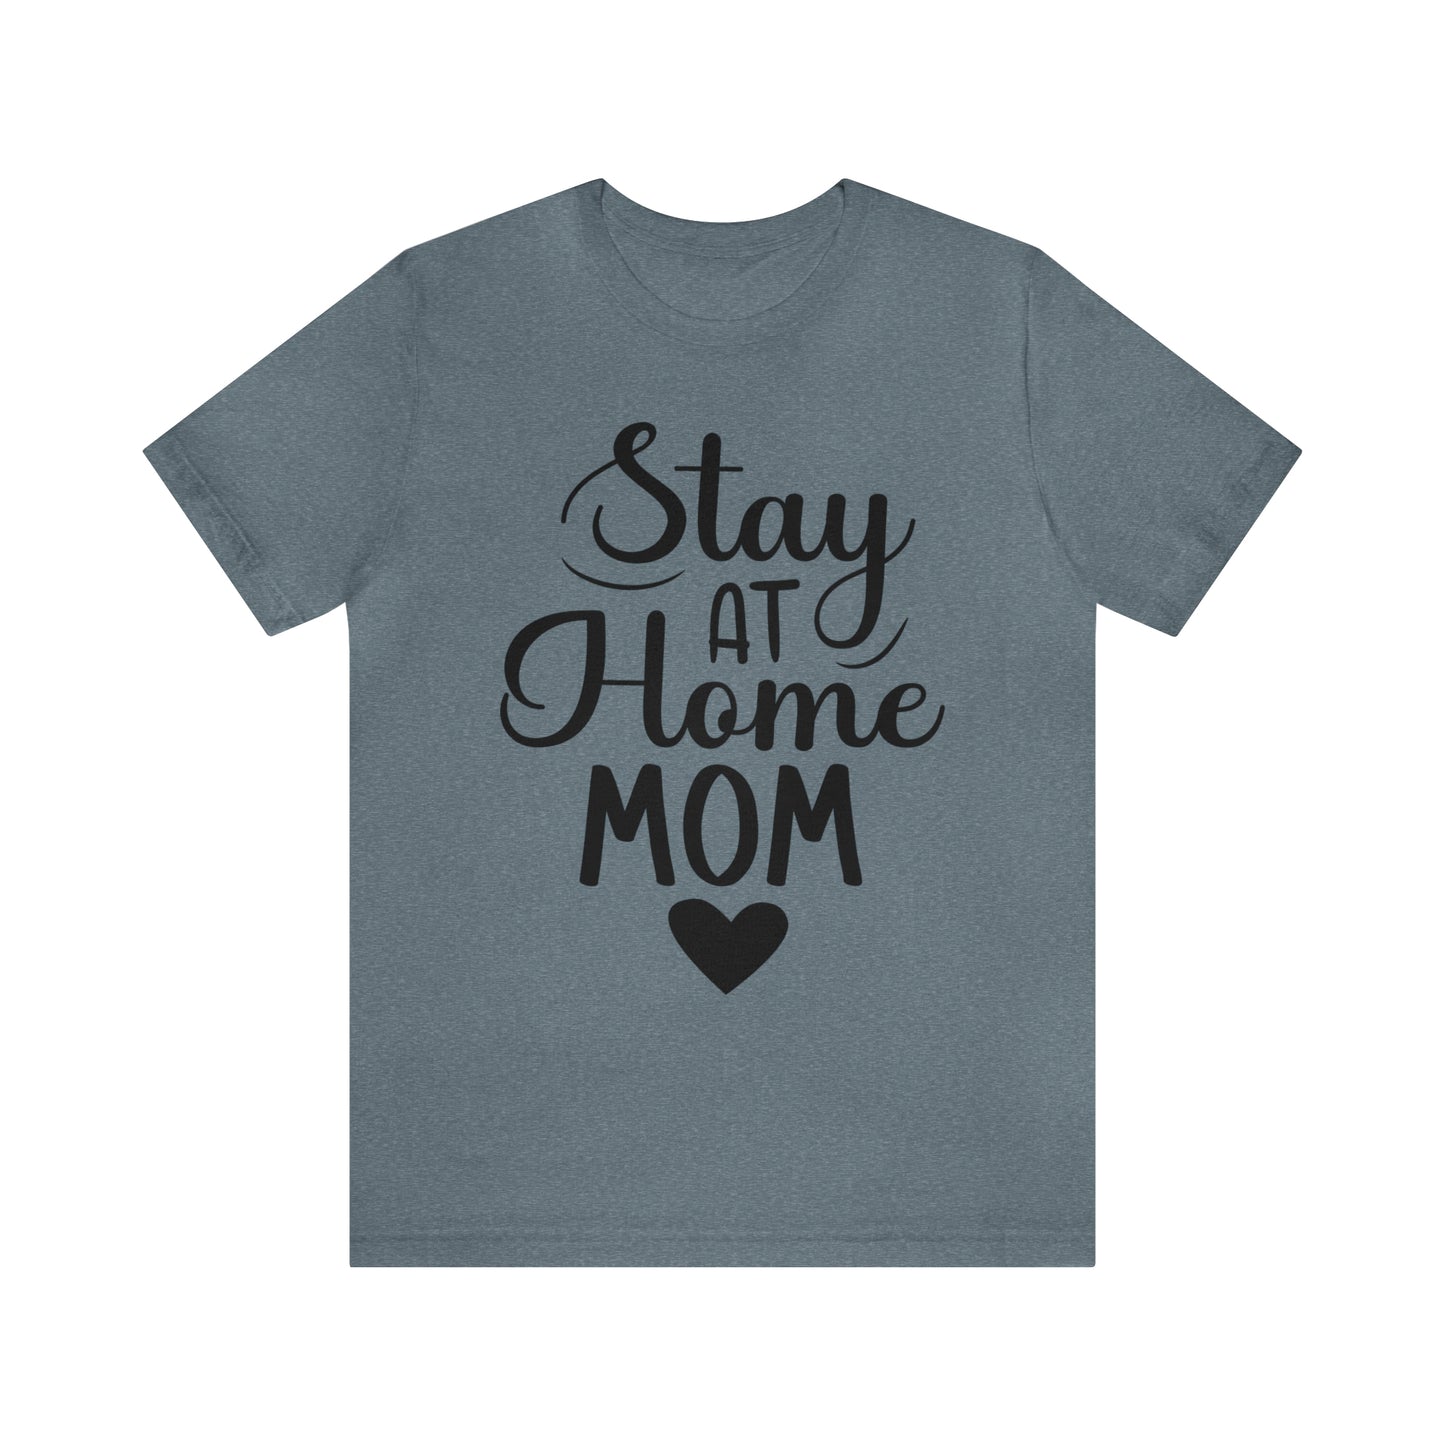 Stay at home mom Short Sleeve Women's Tee